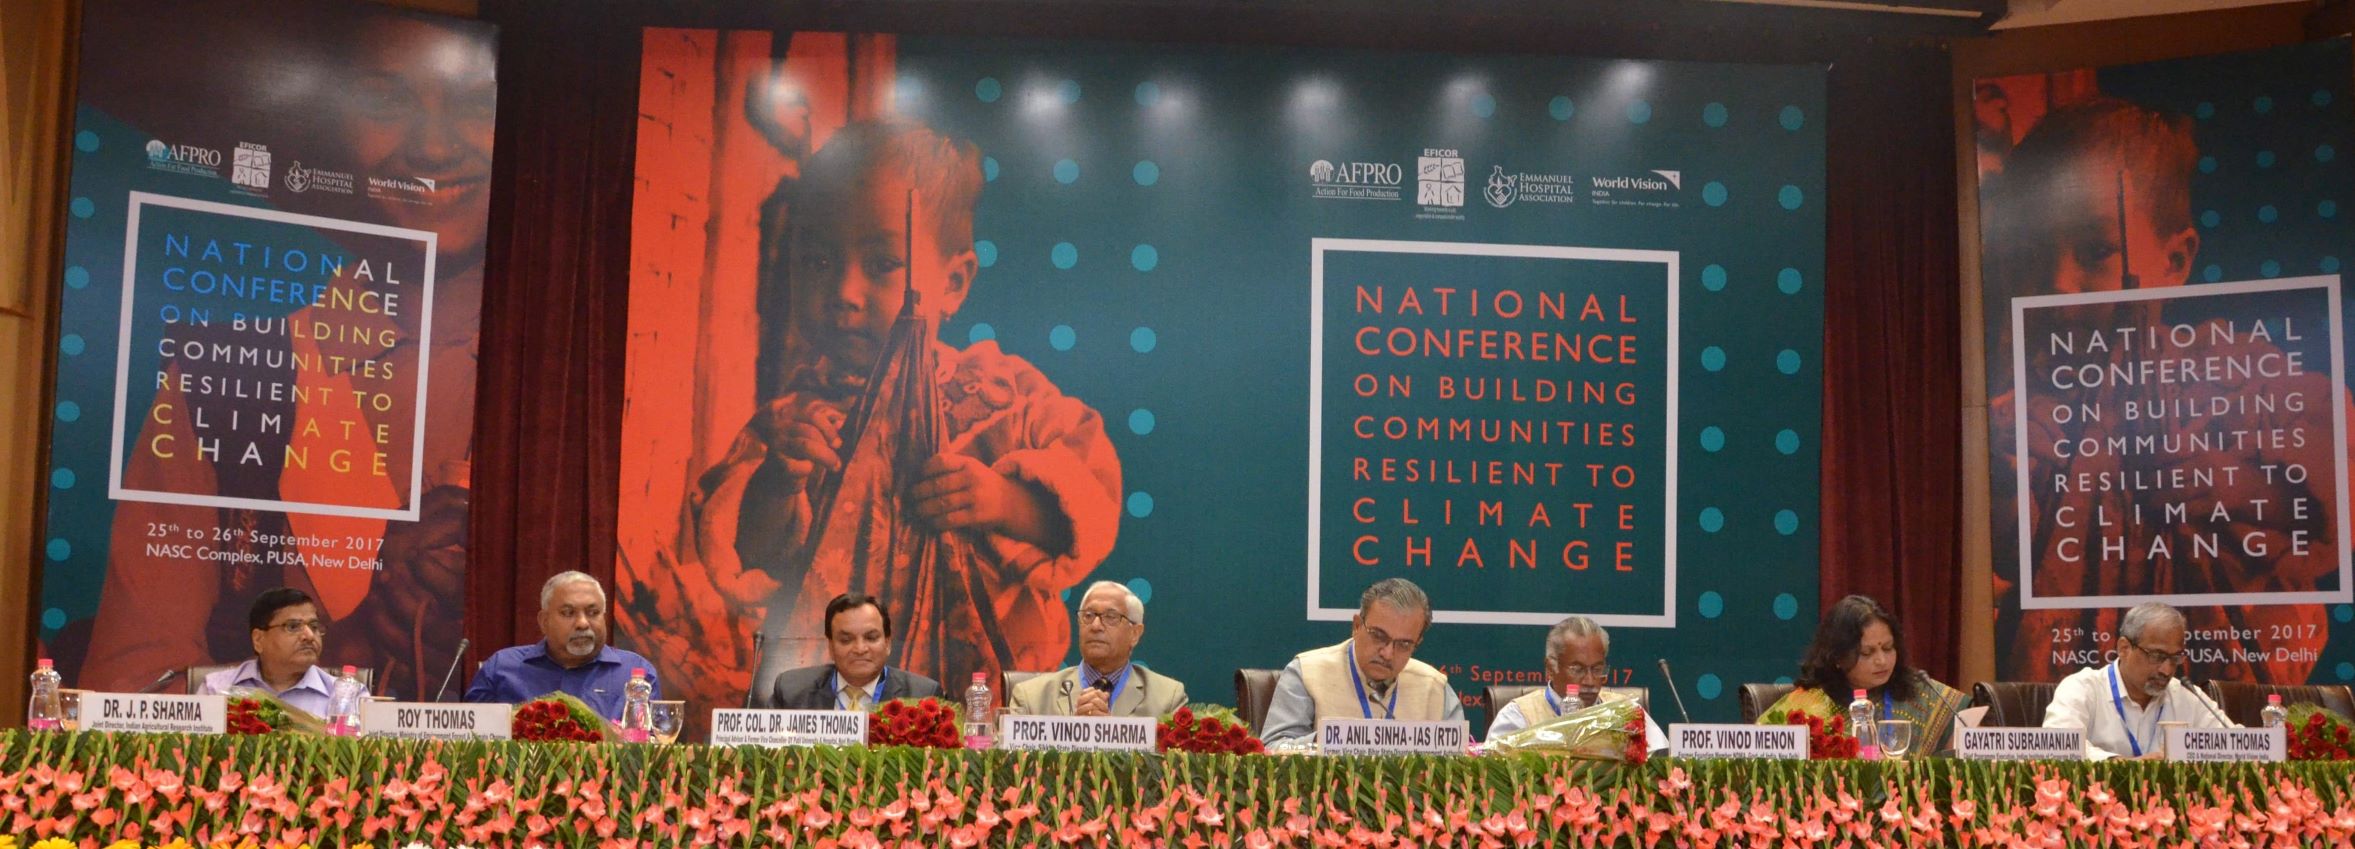 National conference on ‘Building Communities Resilient to Climate Change’